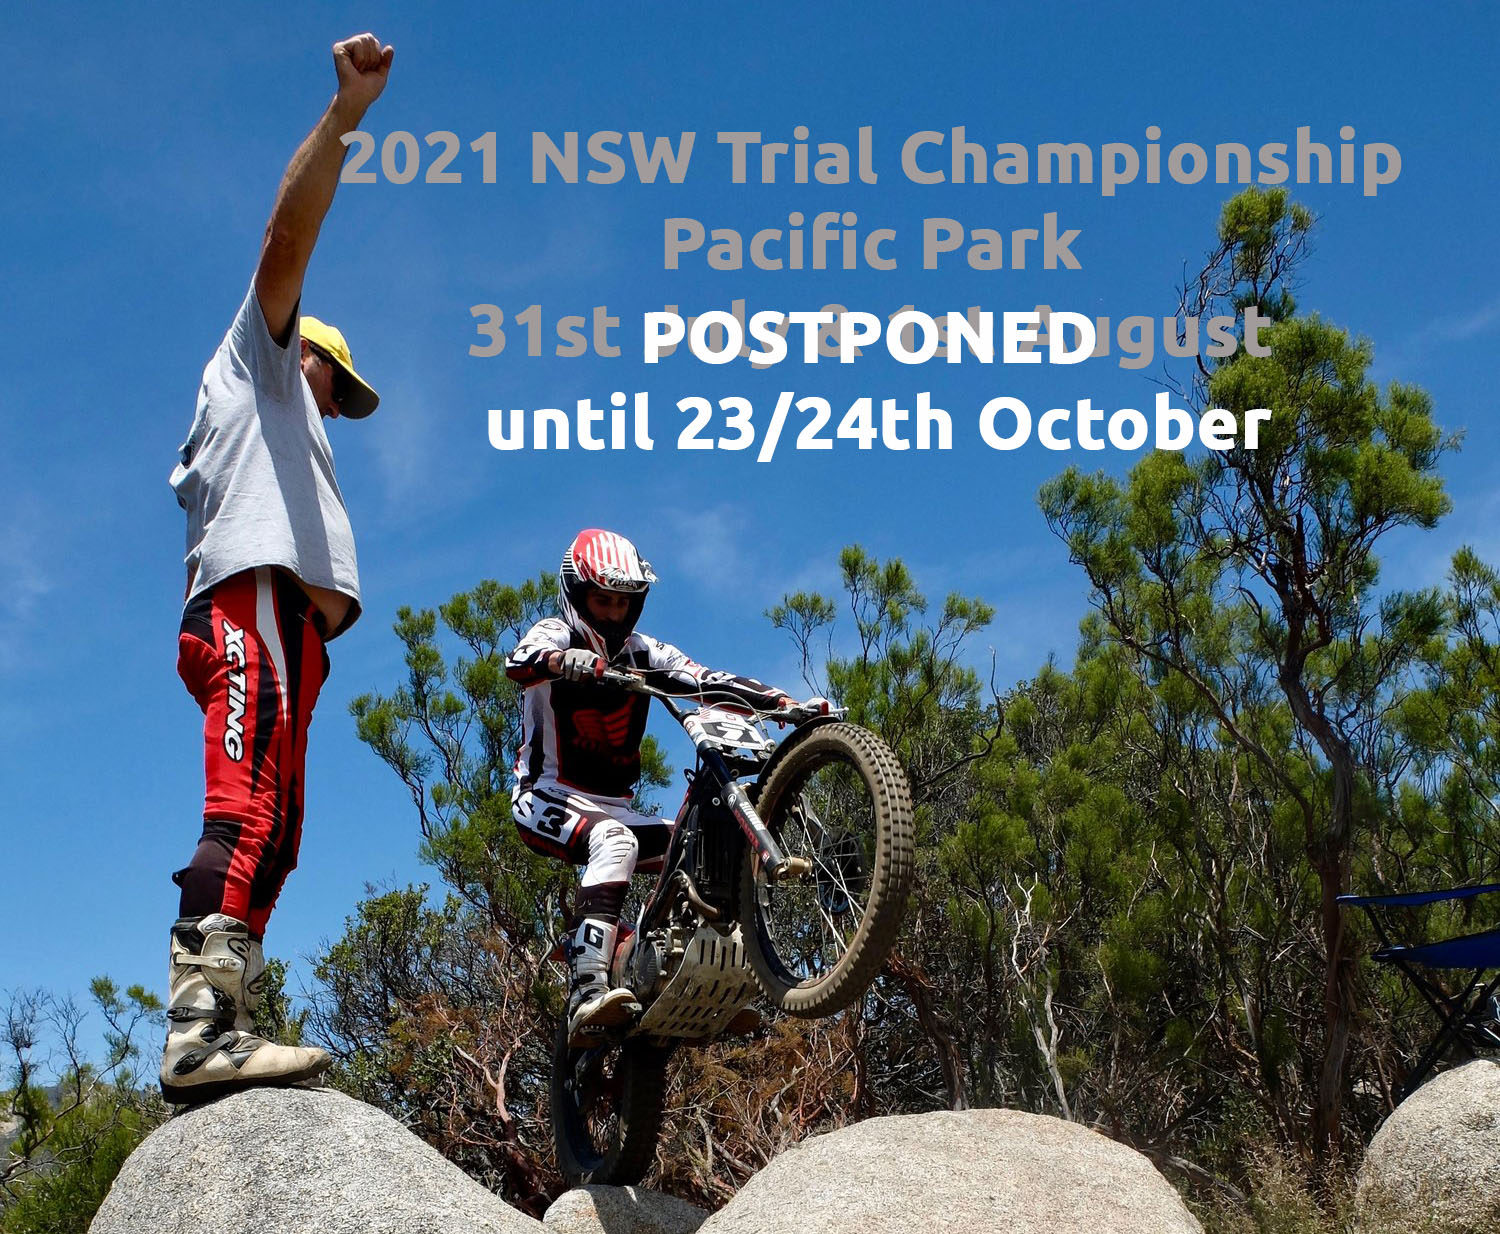 NSW COVID situation - new dates for NSW Trial Championship.